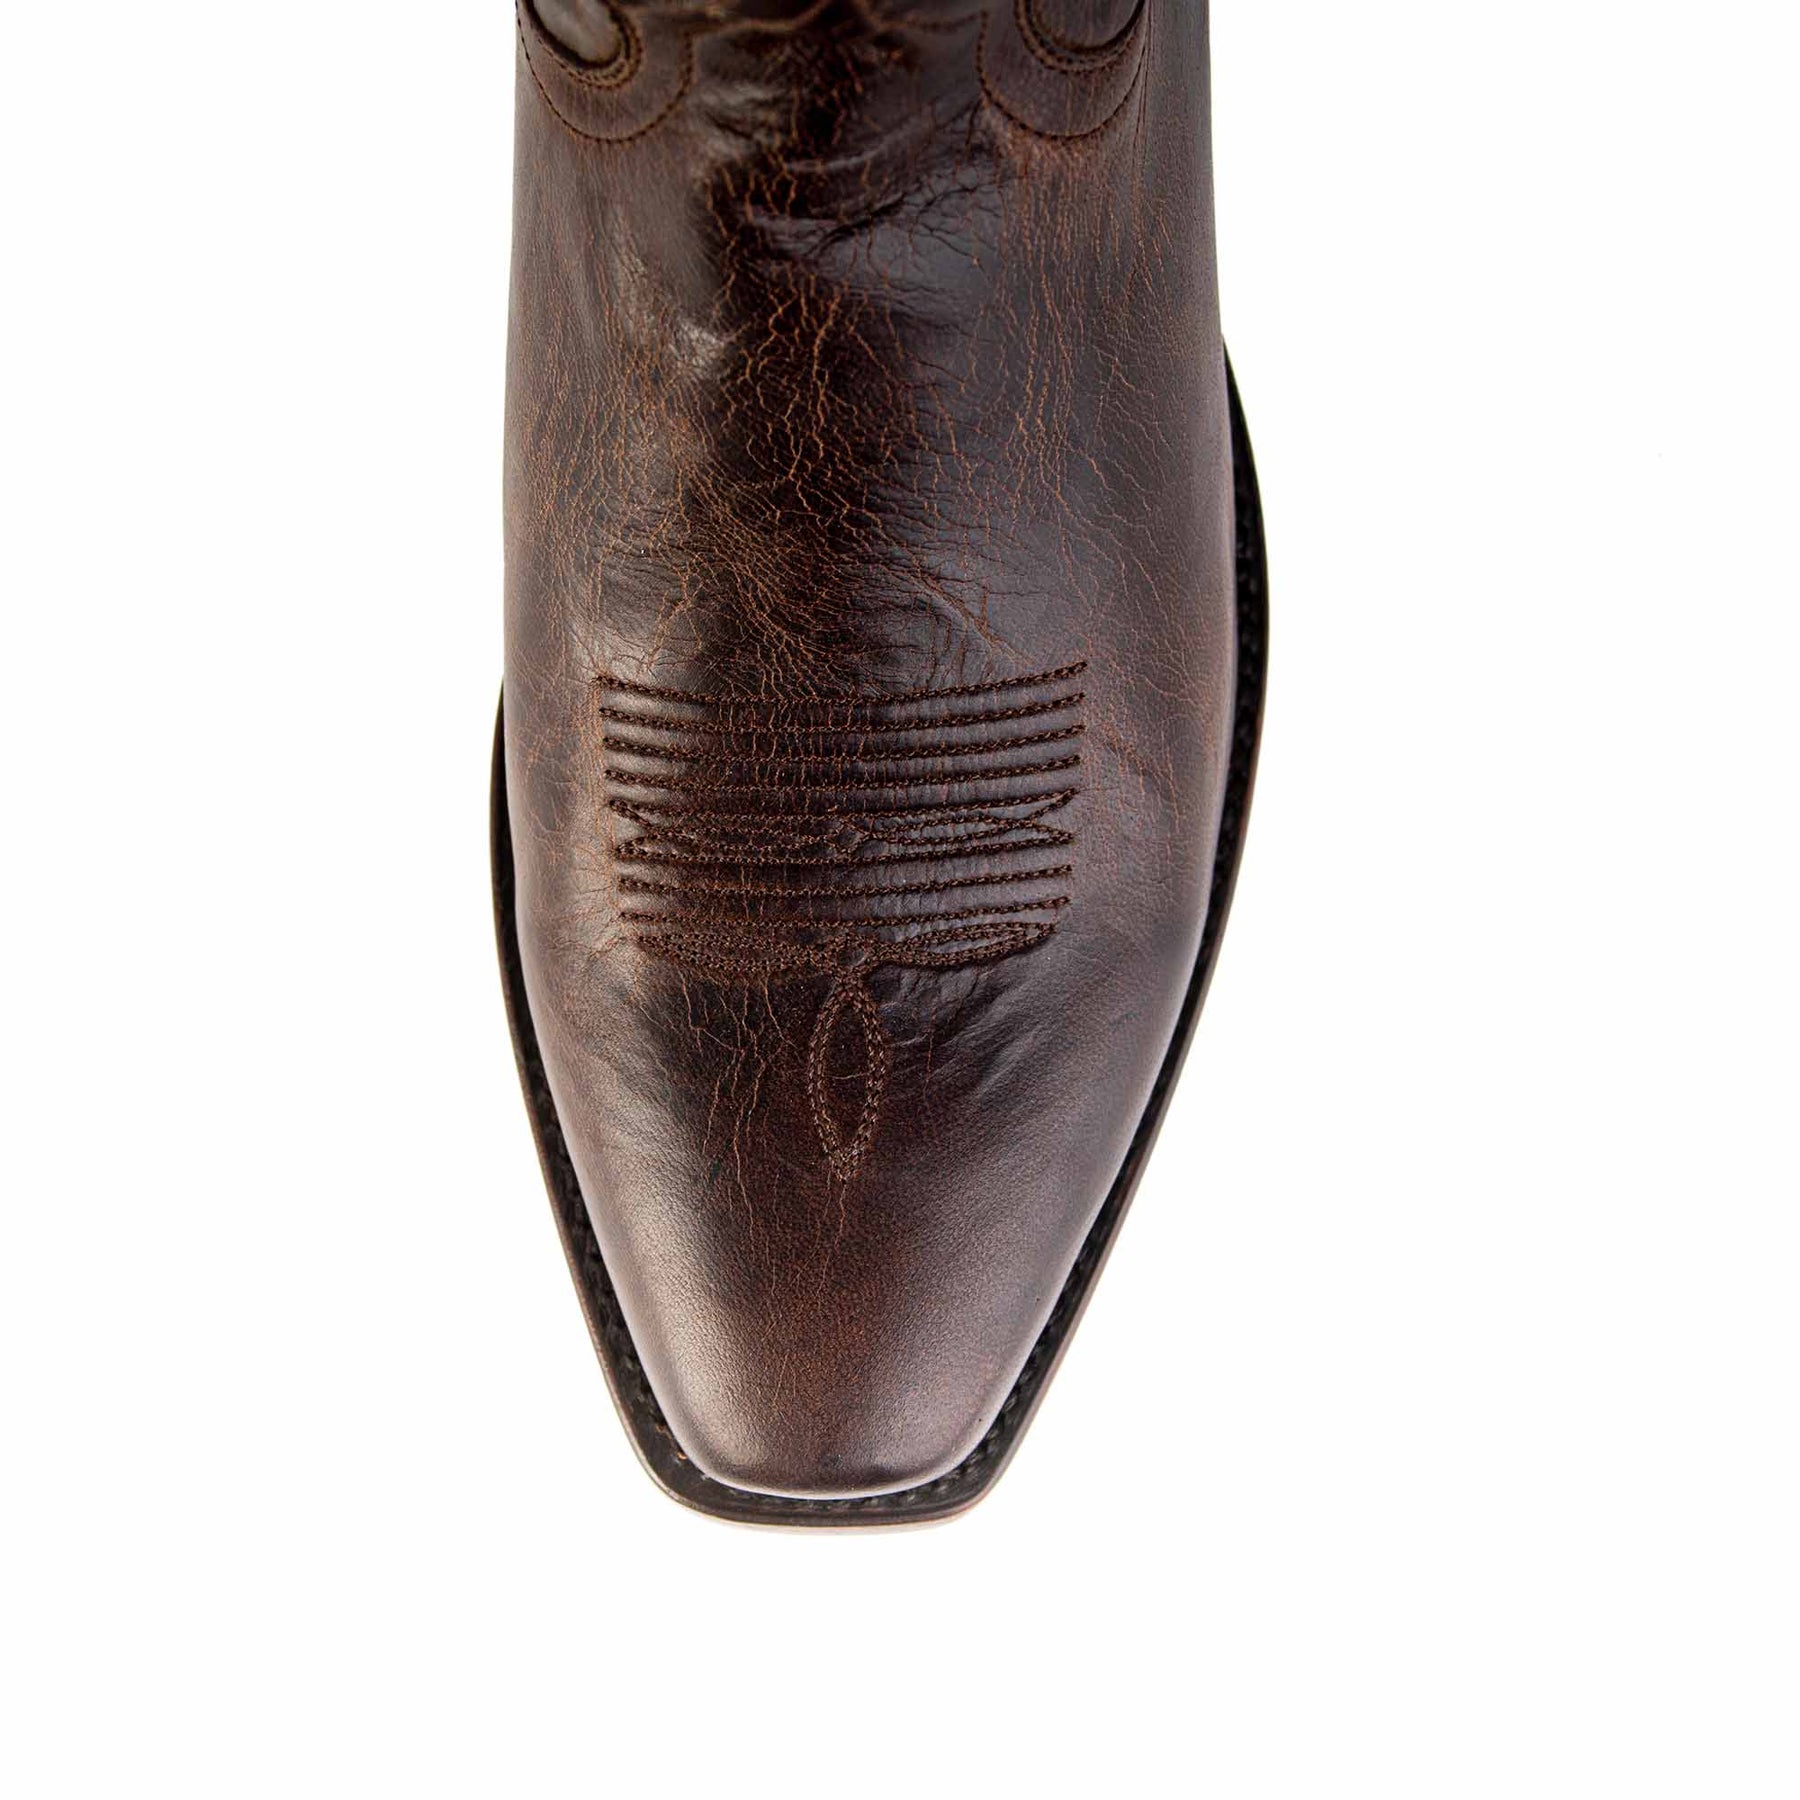 7-Toe Mad Dog Goat Leather Cowboy Boot by RUJO